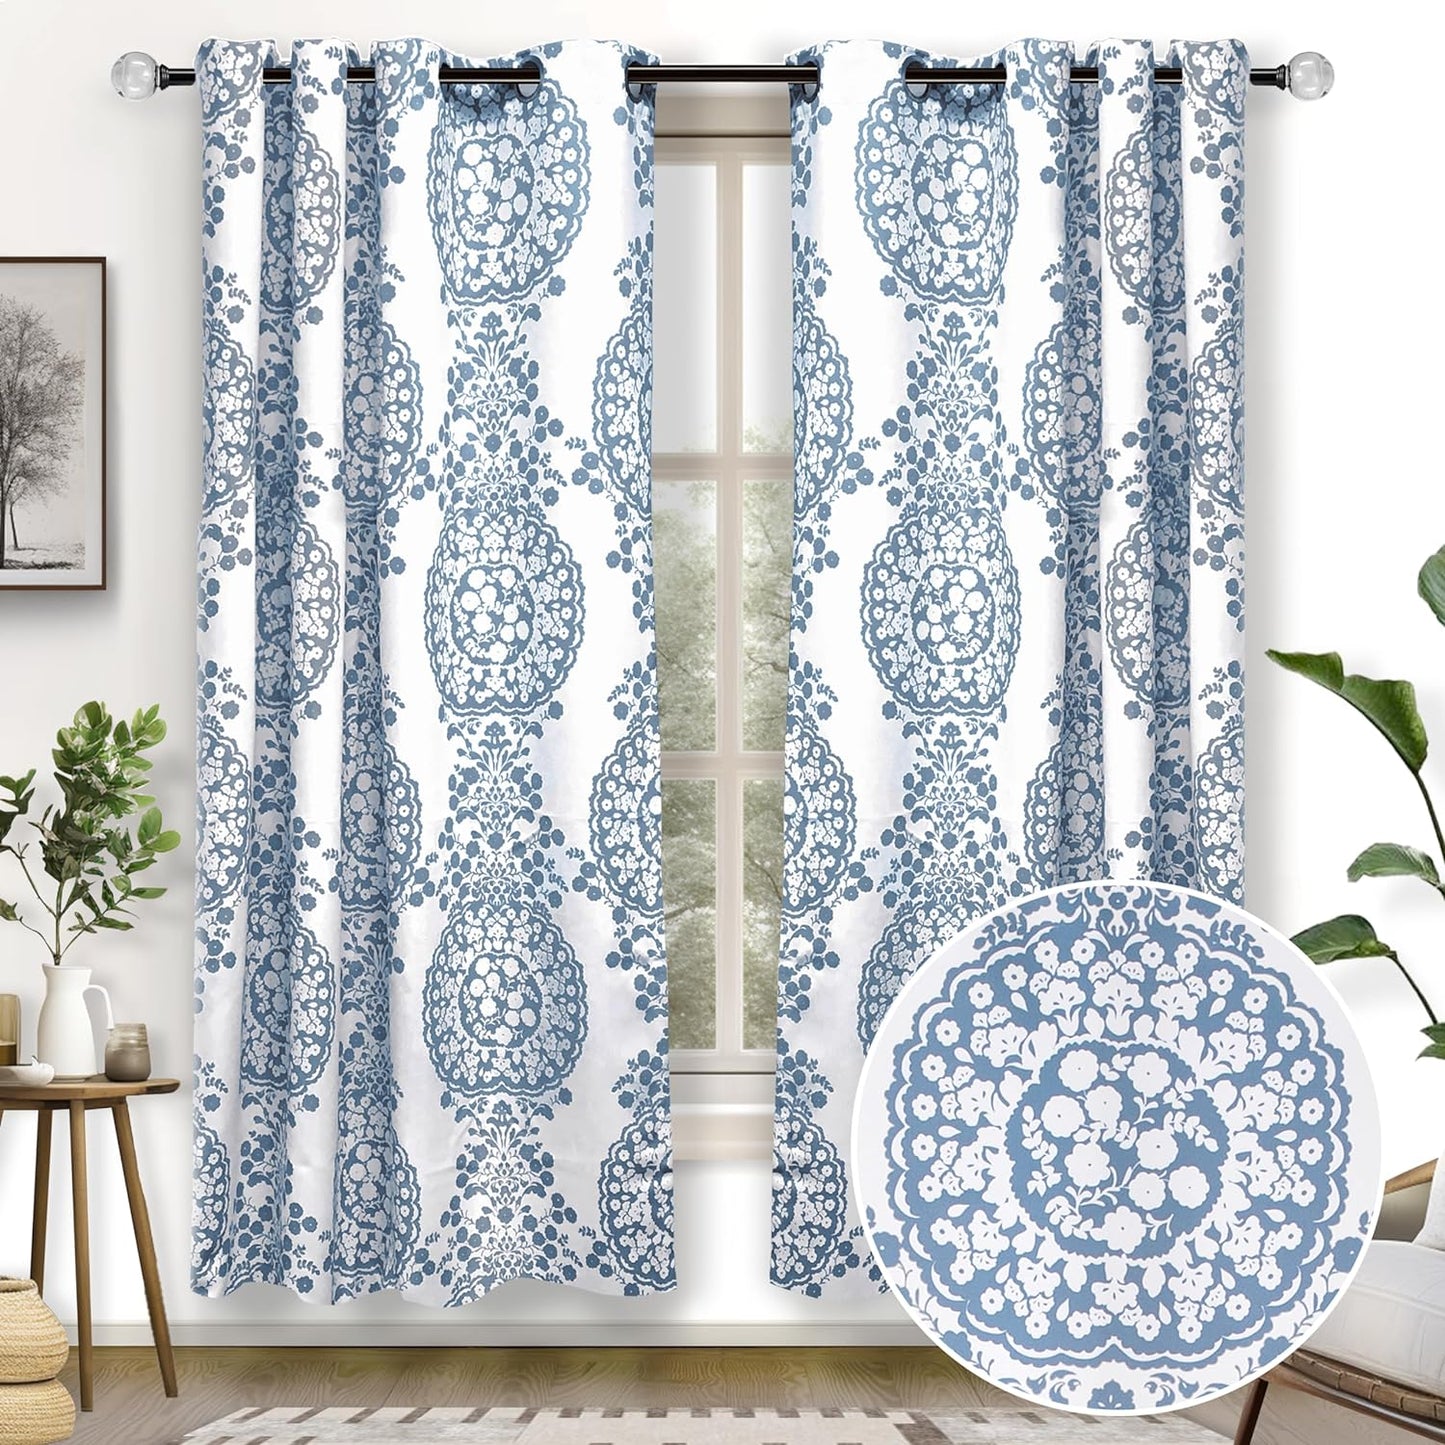 Driftaway Damask Curtains for Kitchen Bathroom Laundry Room Small Windows Floral Damask Medallion Patterned Adjustable Tie up Curtain Single 45 Inch by 63 Inch Dusty Blue  DriftAway Blue (15)52"X63"(Curtains) 